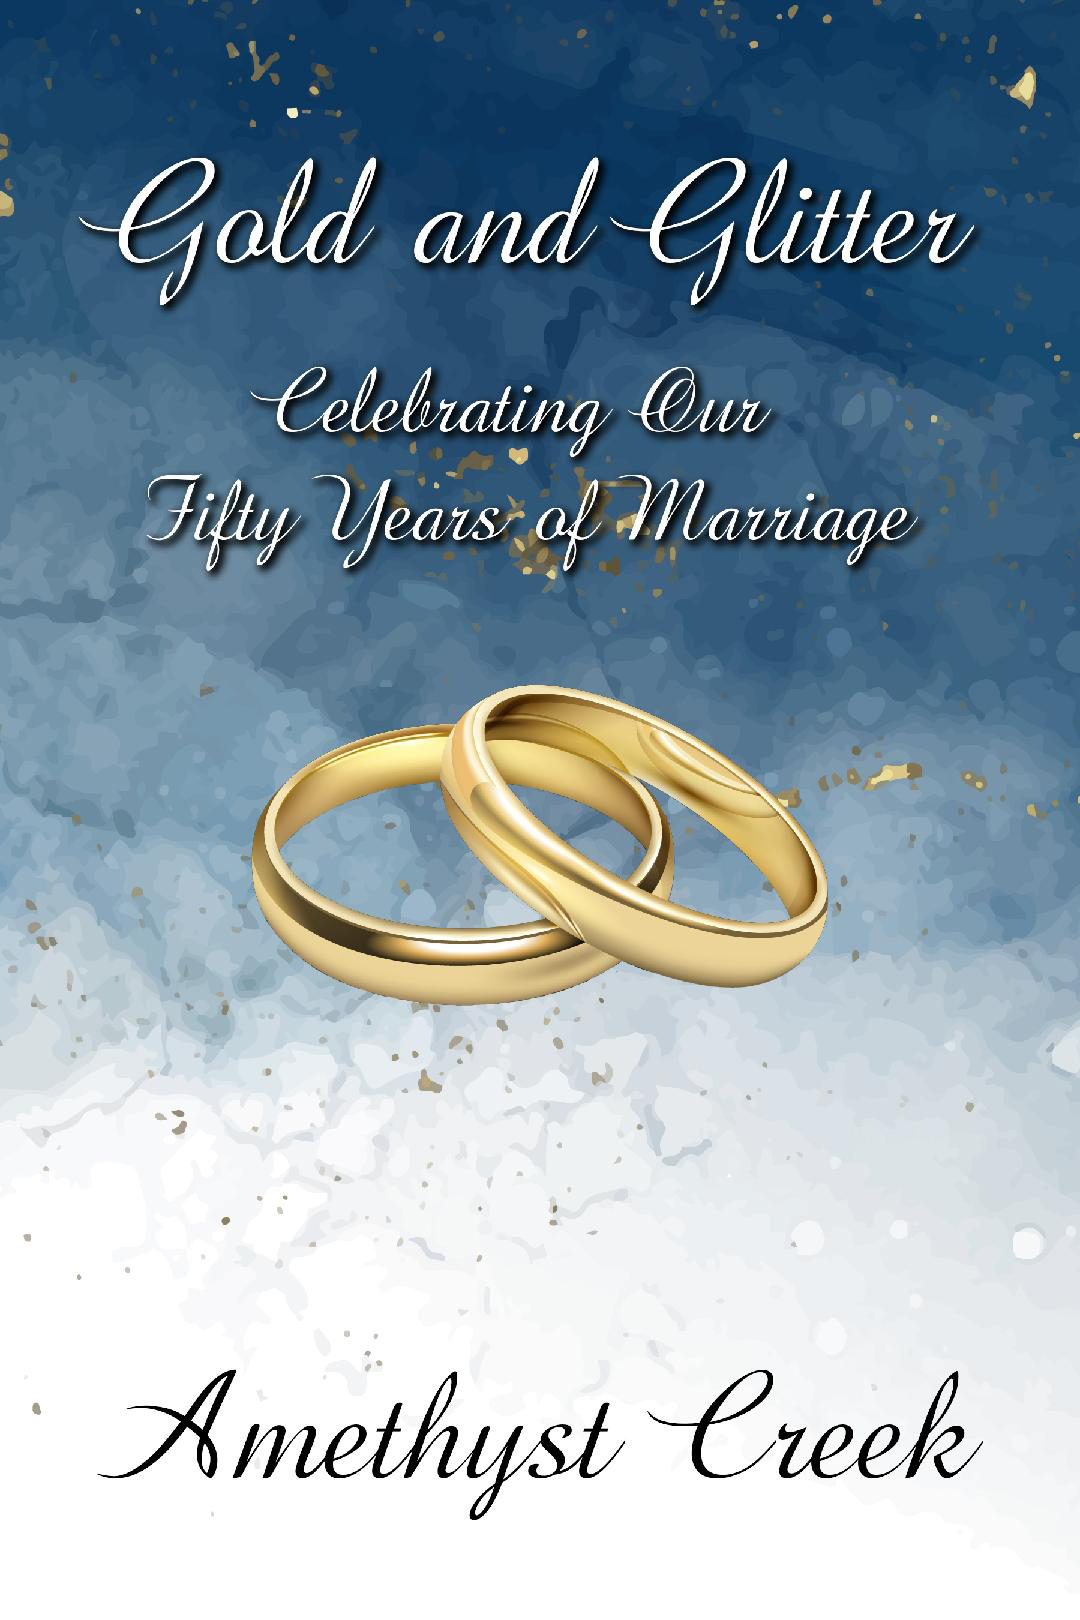 Purchase Gold and Glitter, Celebrating Our Fifty Years of Marriage on Amazon.com